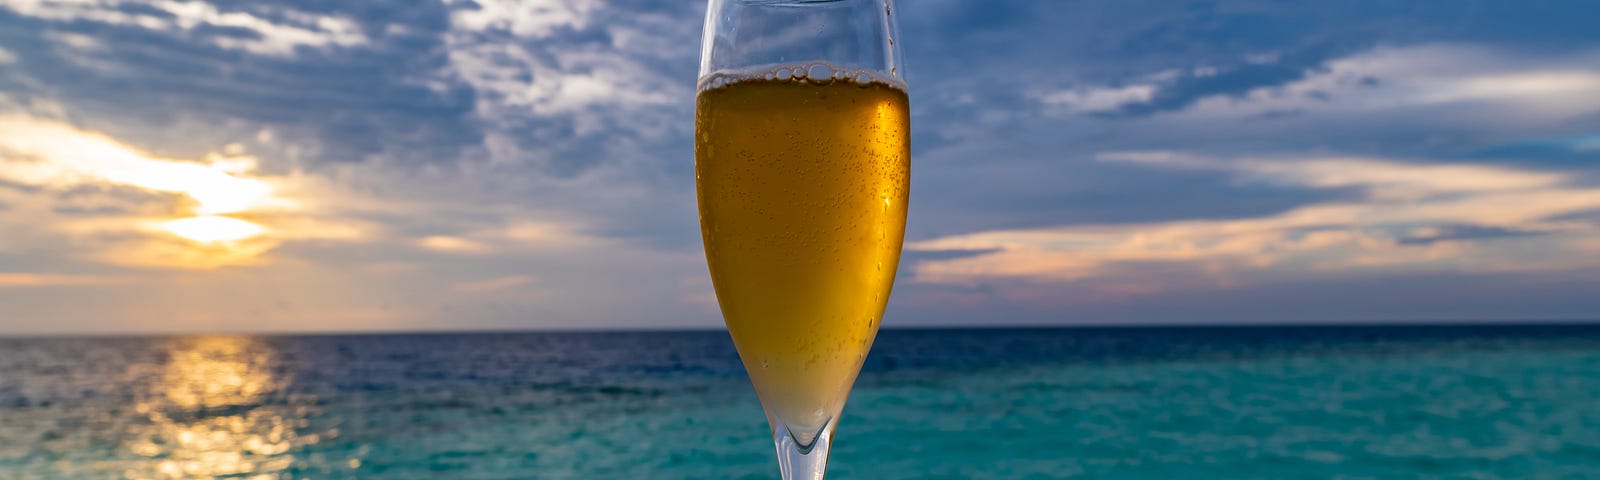 glass of champagne on a dock overlooking the ocean